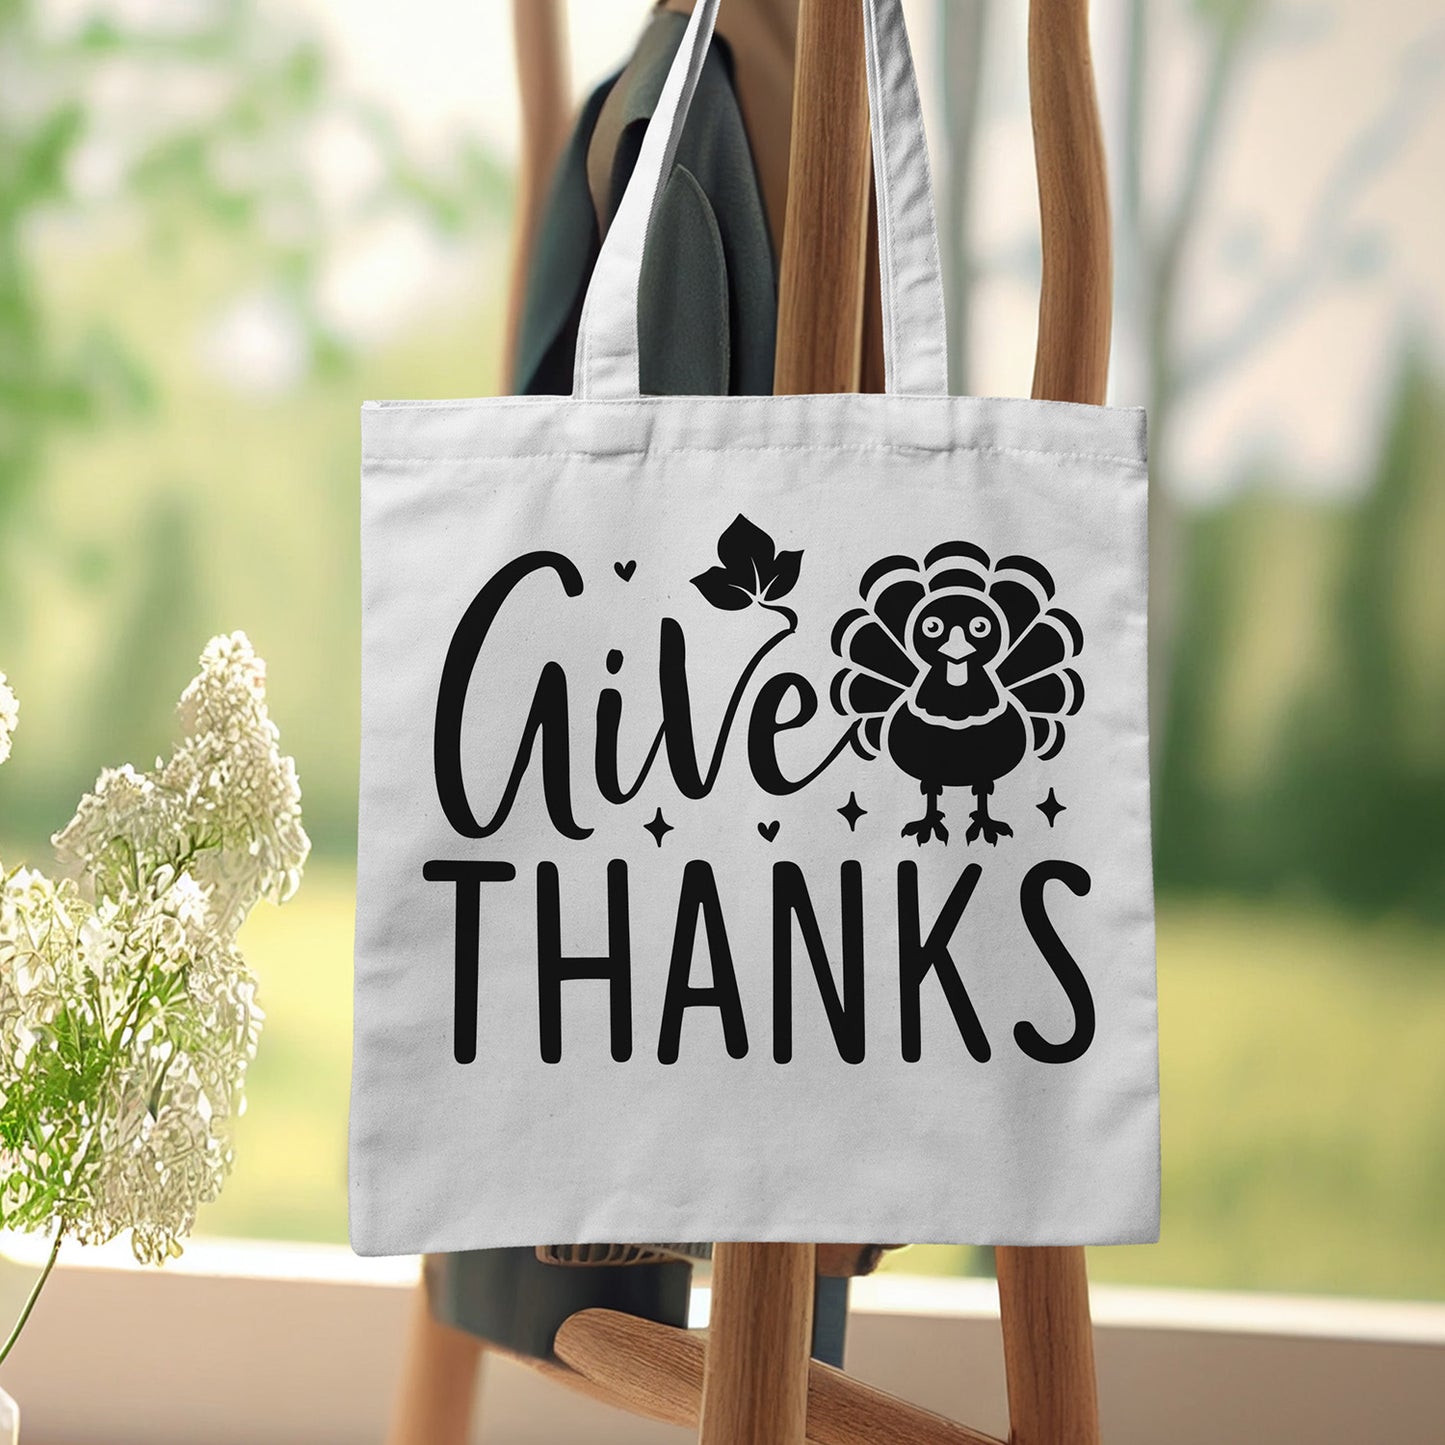 "Give Thanks" With Turkey Graphic